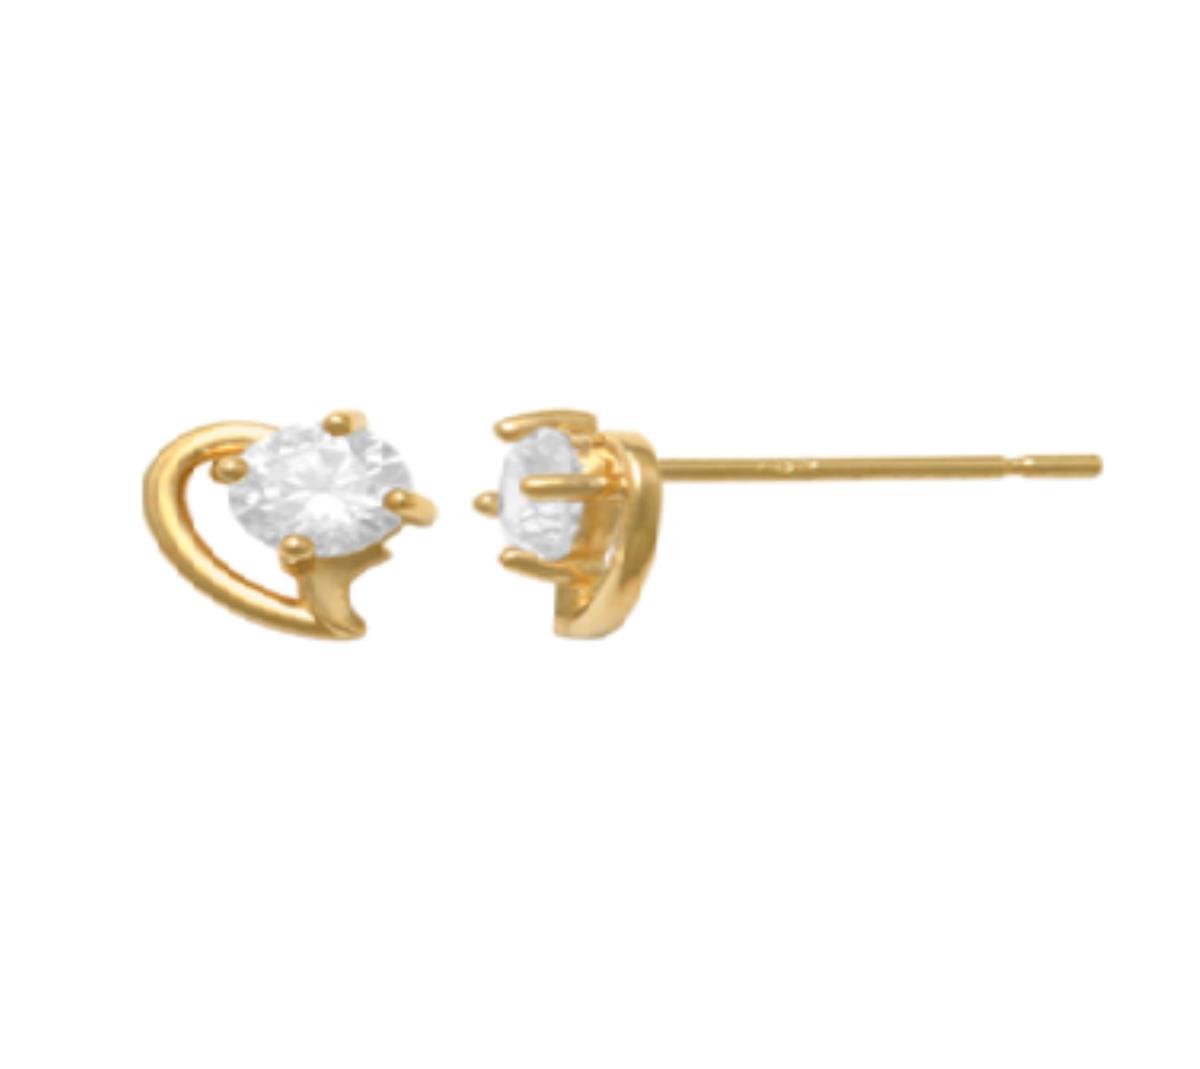 10K Yellow Gold 3.5mm Round Cut Polished Heart Stud Earring